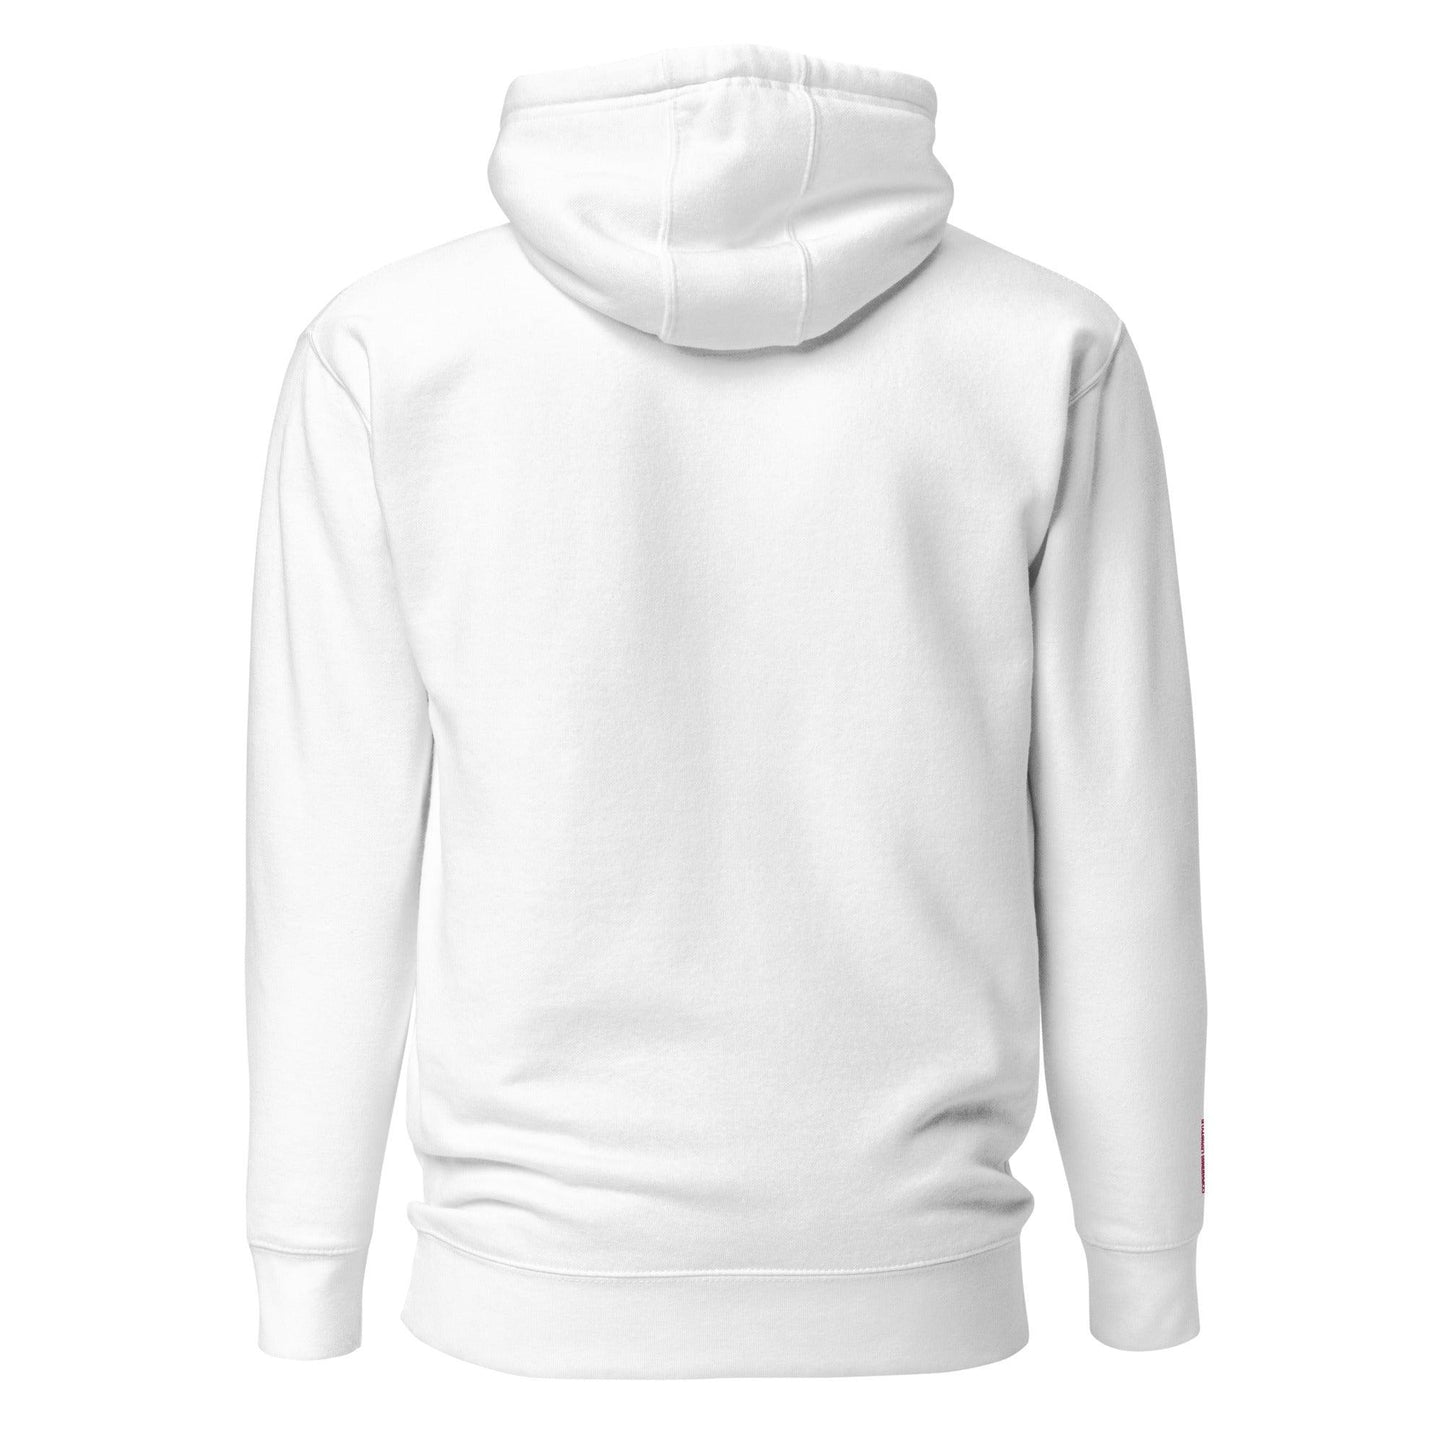 Coffeebre Embroidery Unisex Athleisure Hoodie - COFFEEBRE